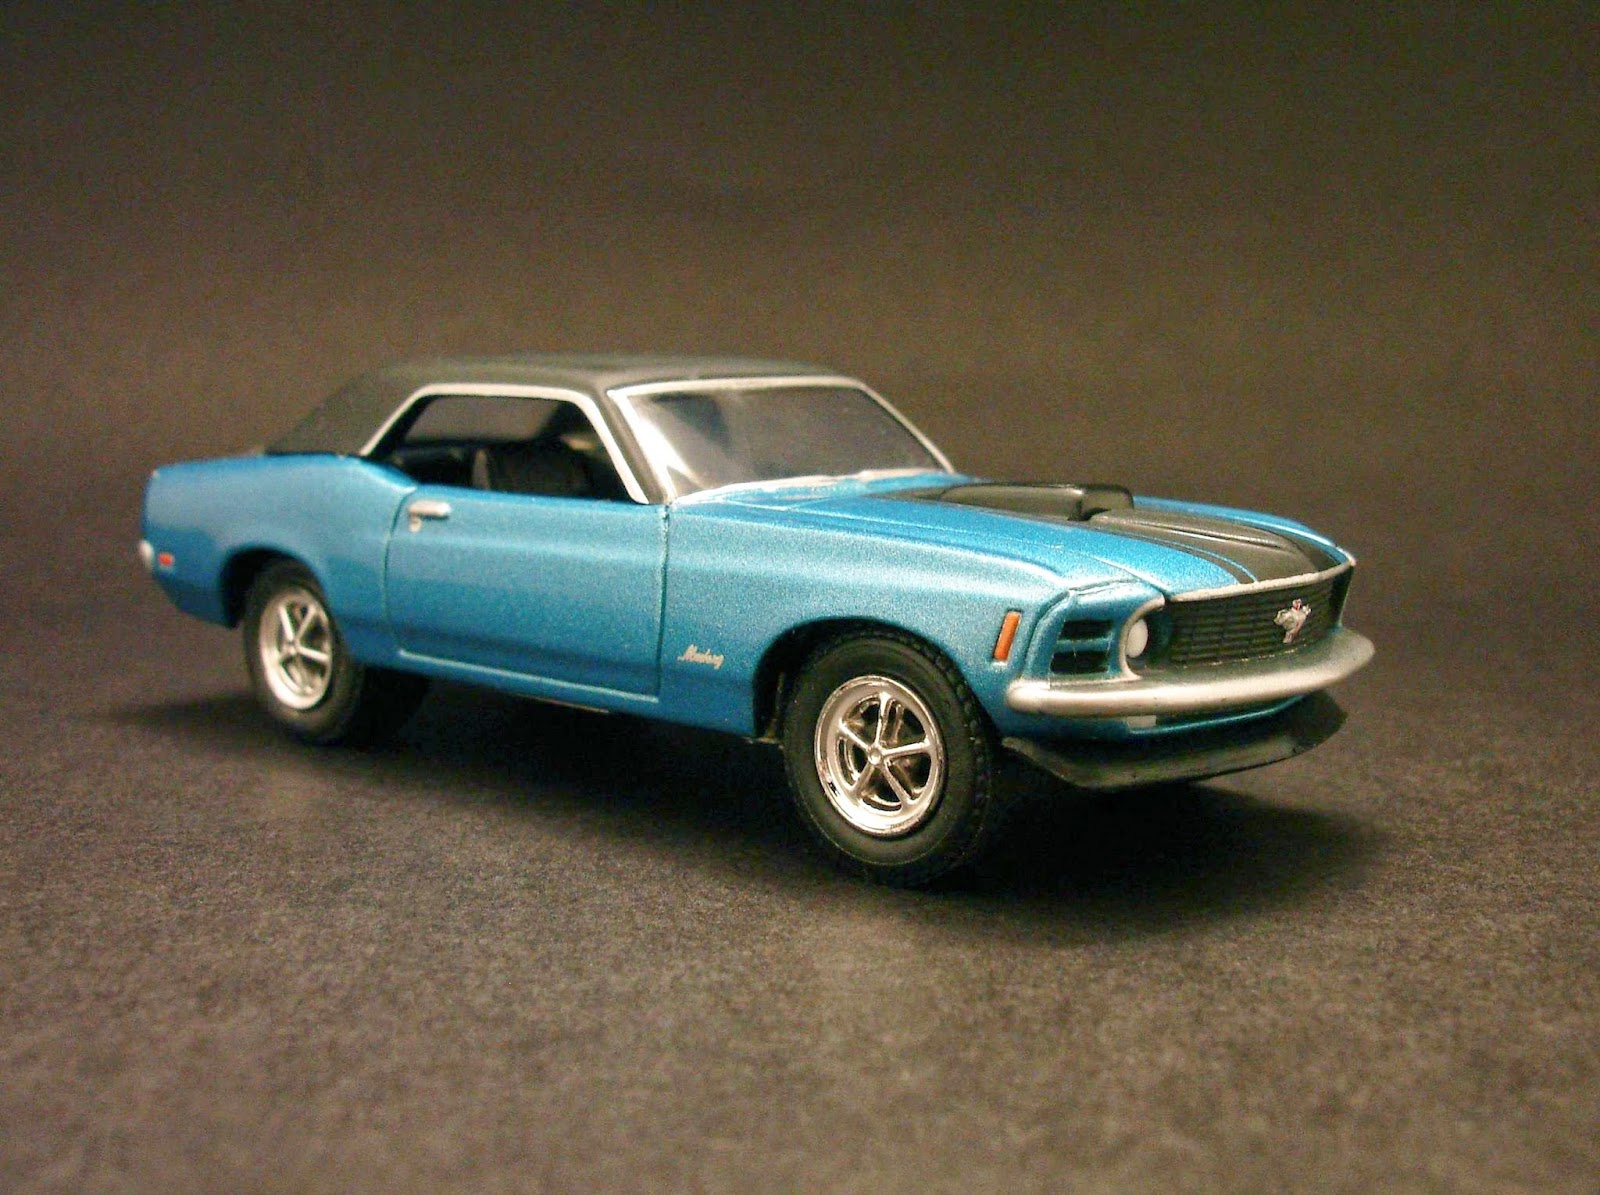 Diecast Hobbist: 1970 Ford Mustang Coupe